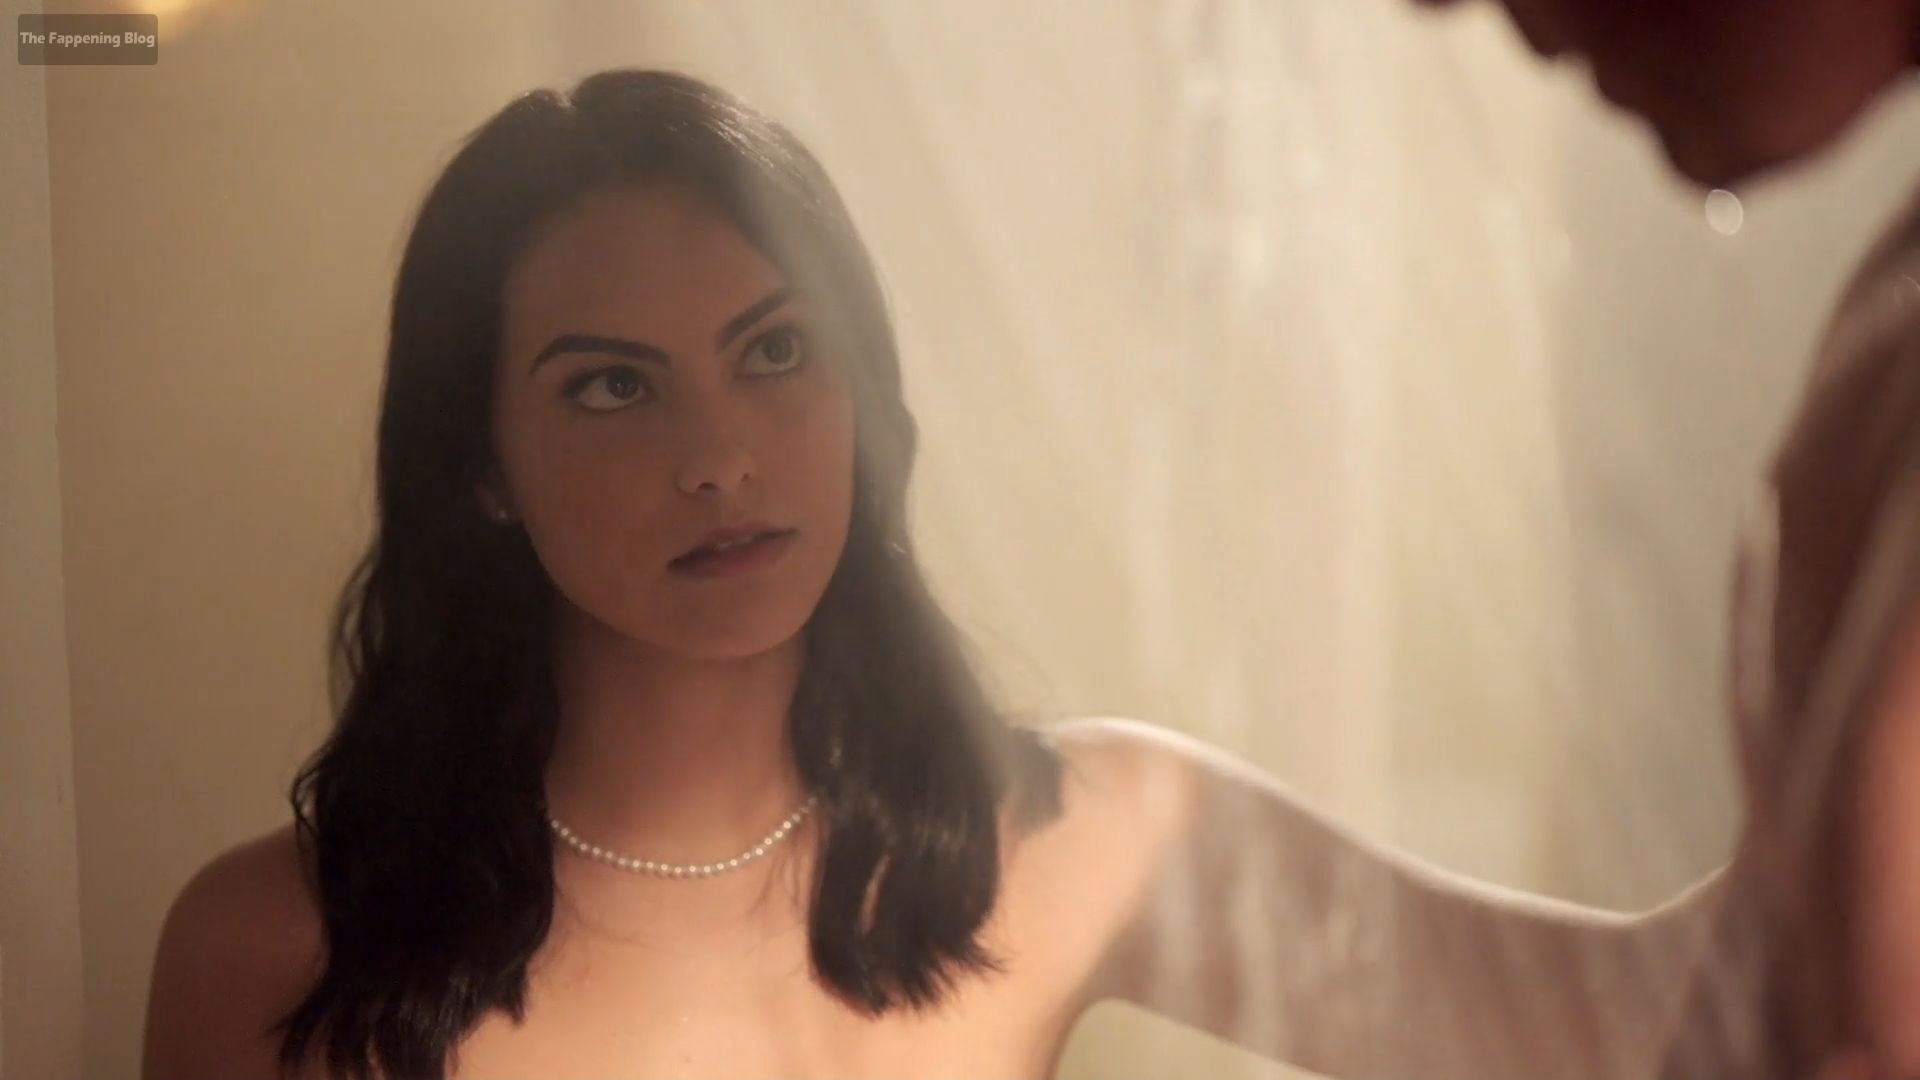 Camila mendes topless